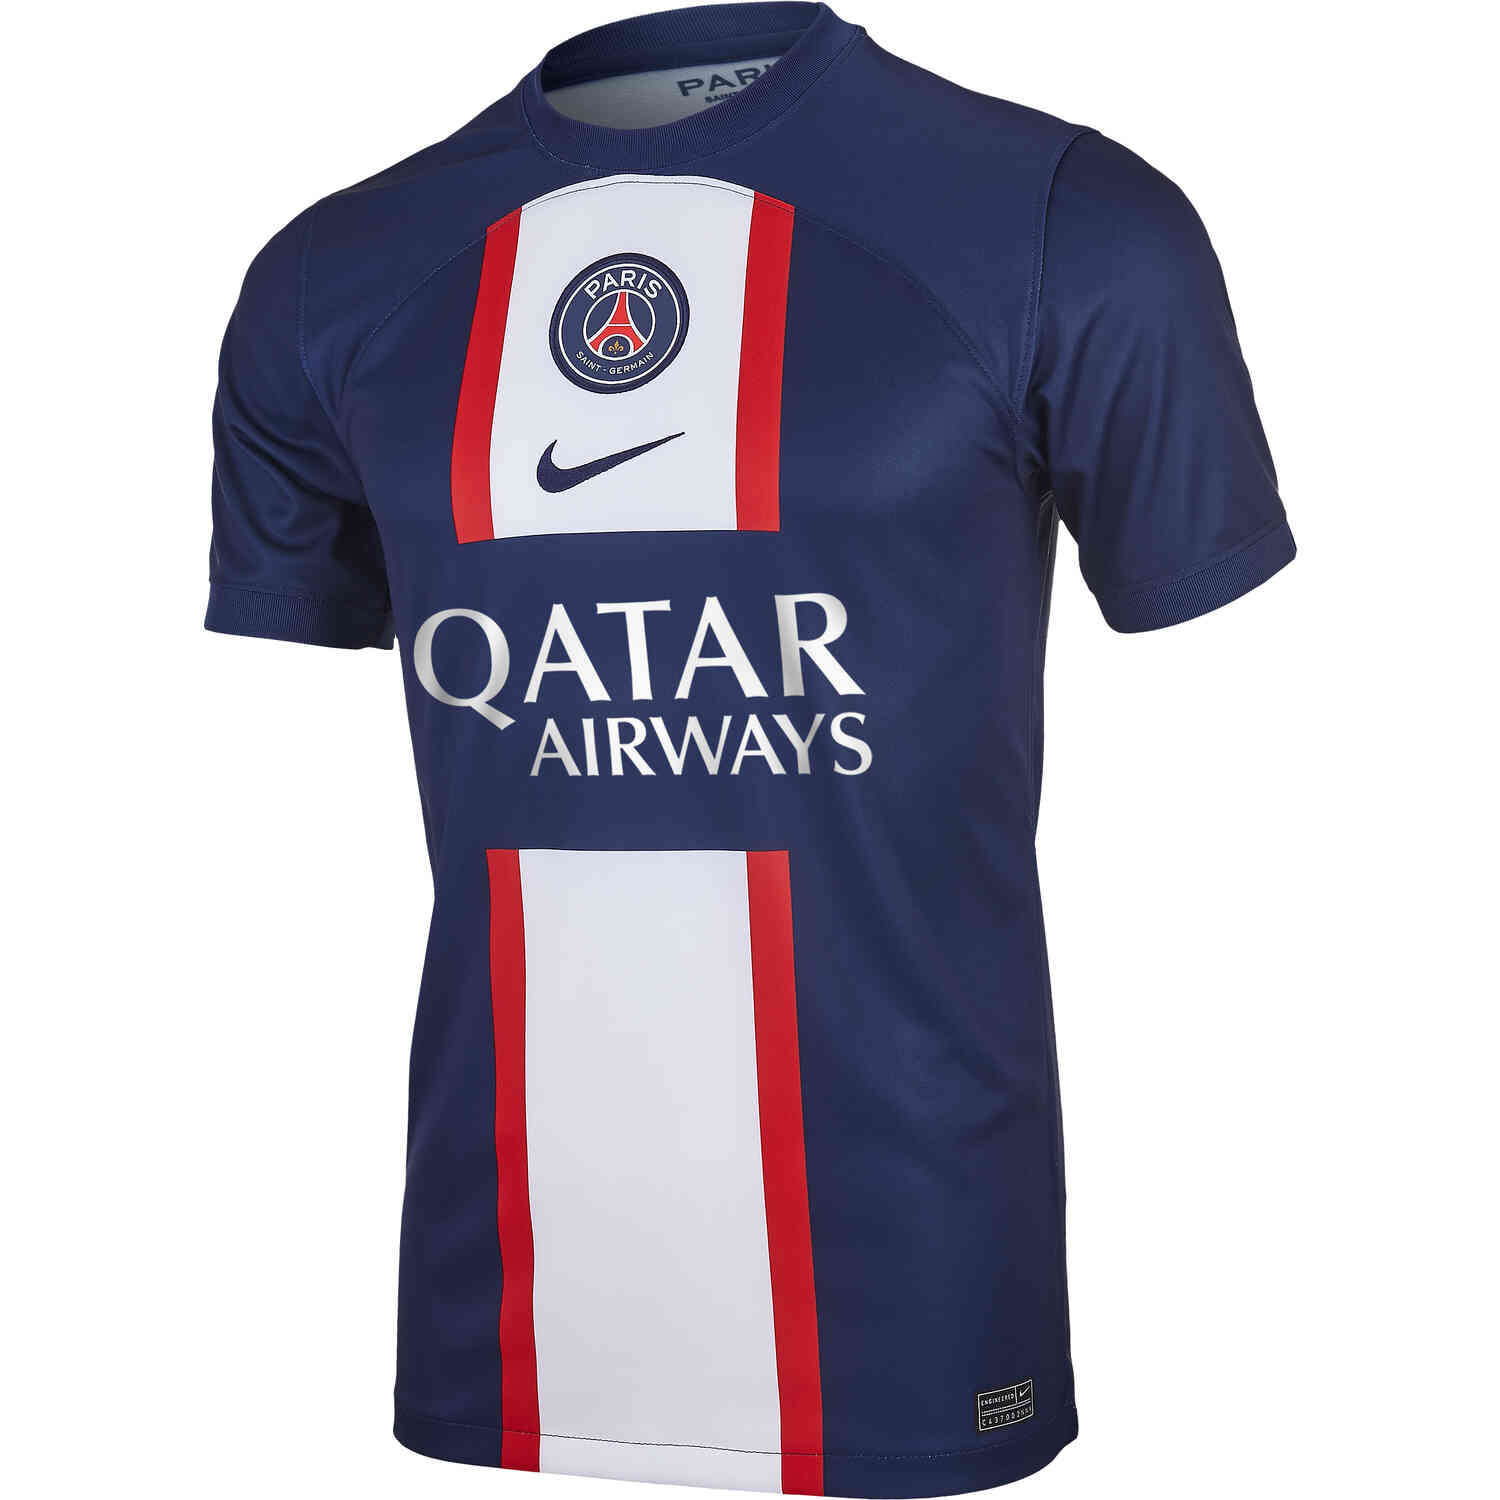 Anyone know where I can find the PSG 06/07 Away dark red jersey